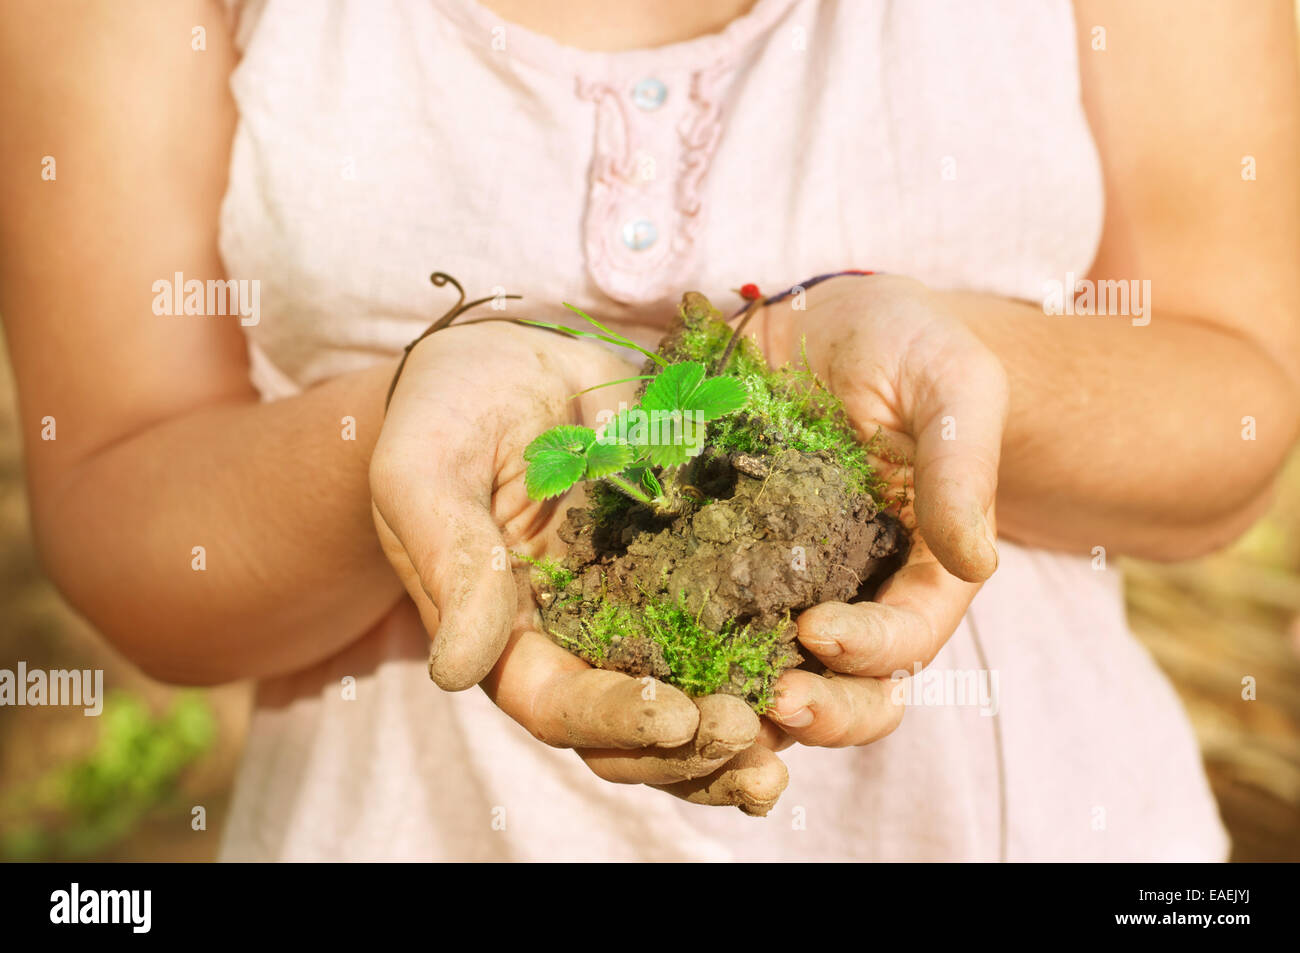 Woman's hands holding strawberry in dirt Stock Photo